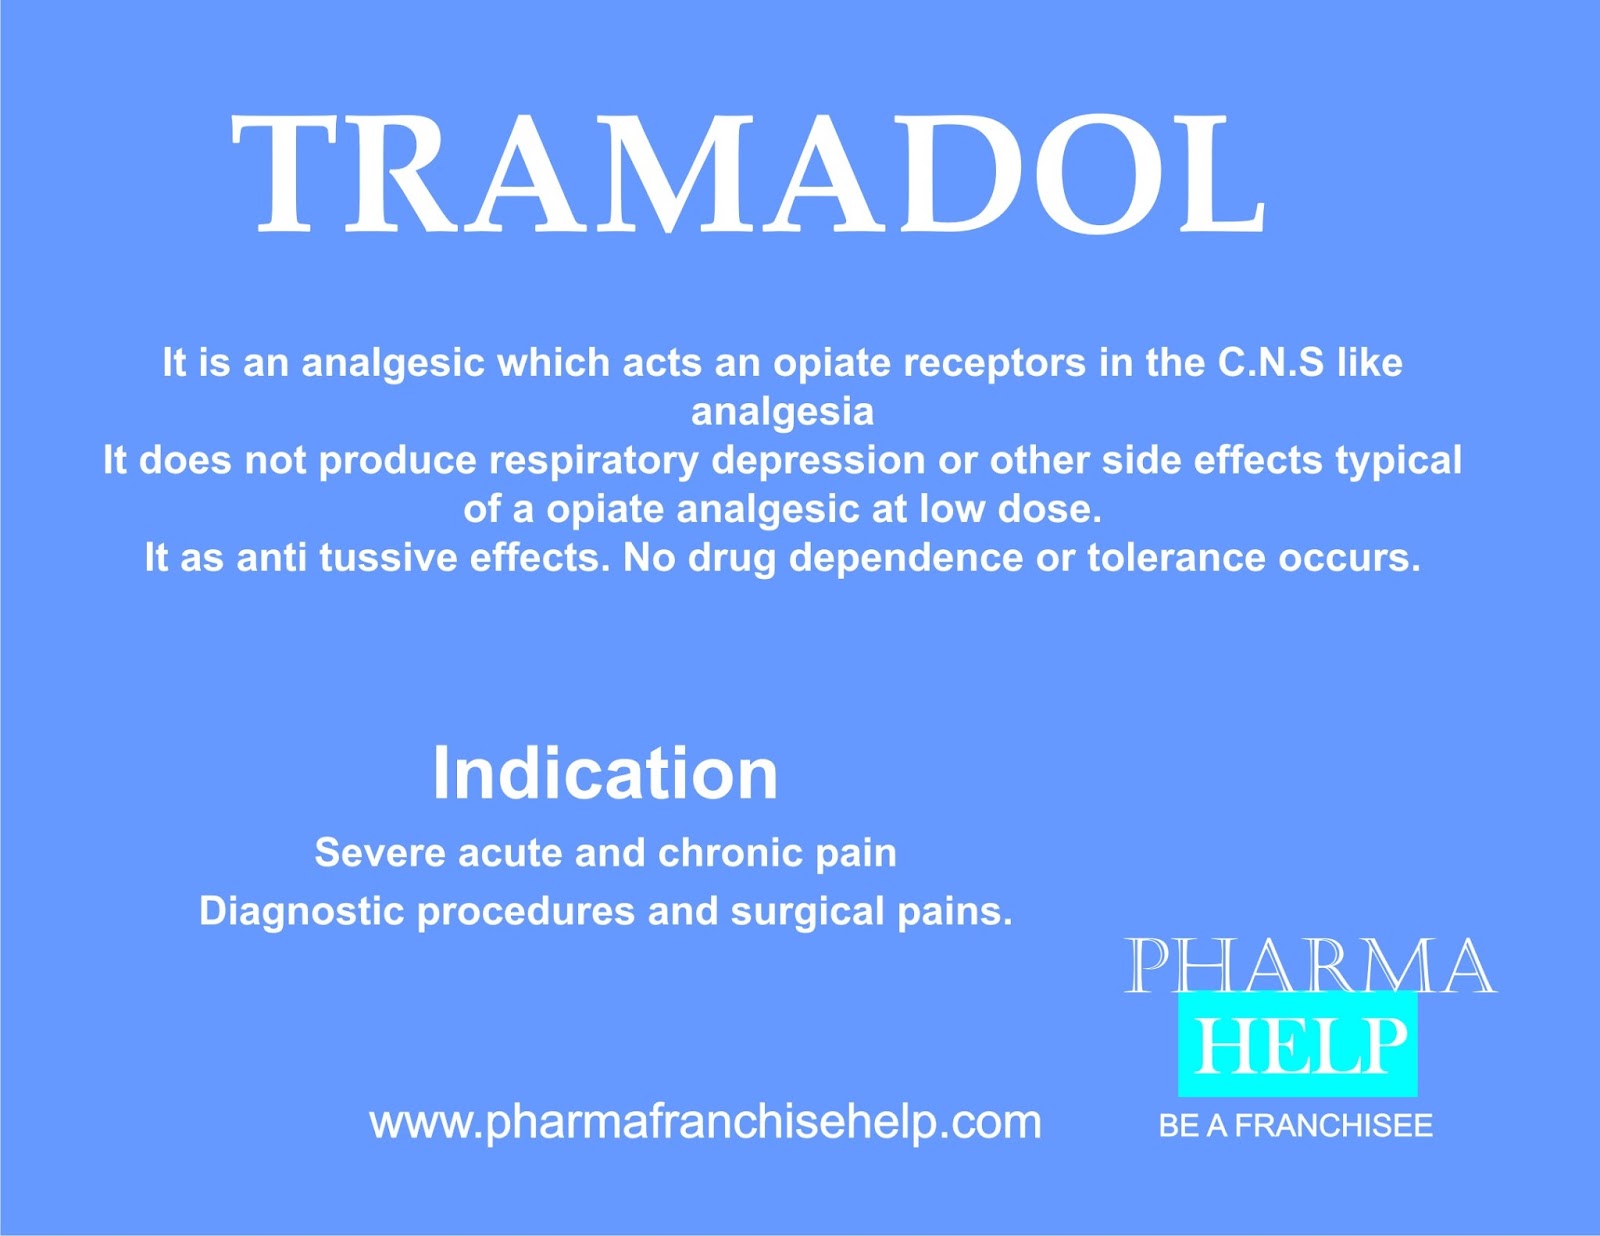 What Is The Indication Of Tramadol